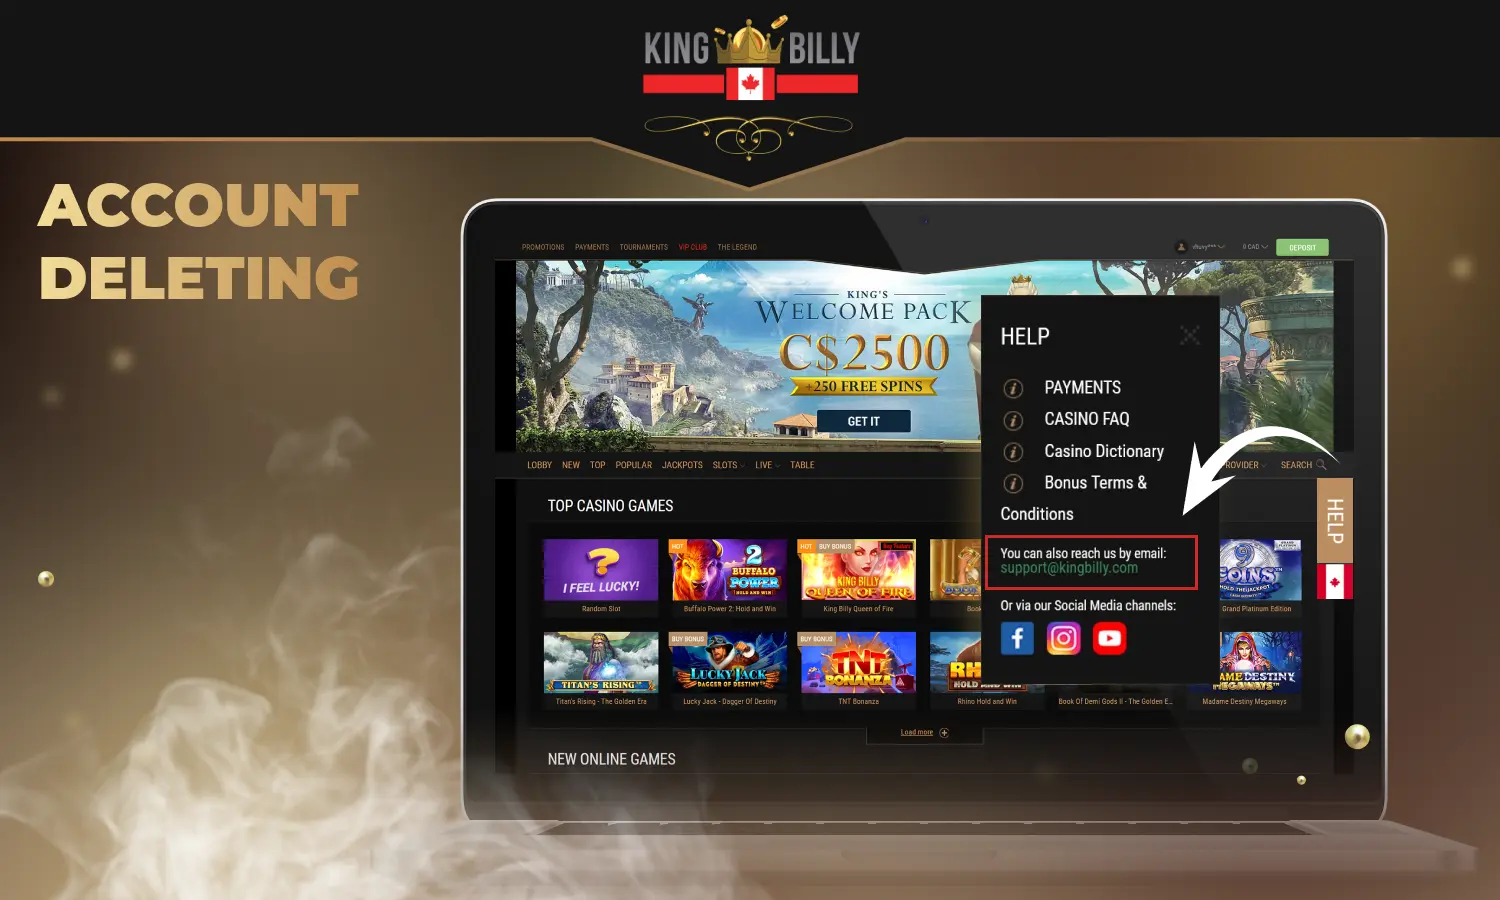 Canadian players can delete their account at King Billy Casino